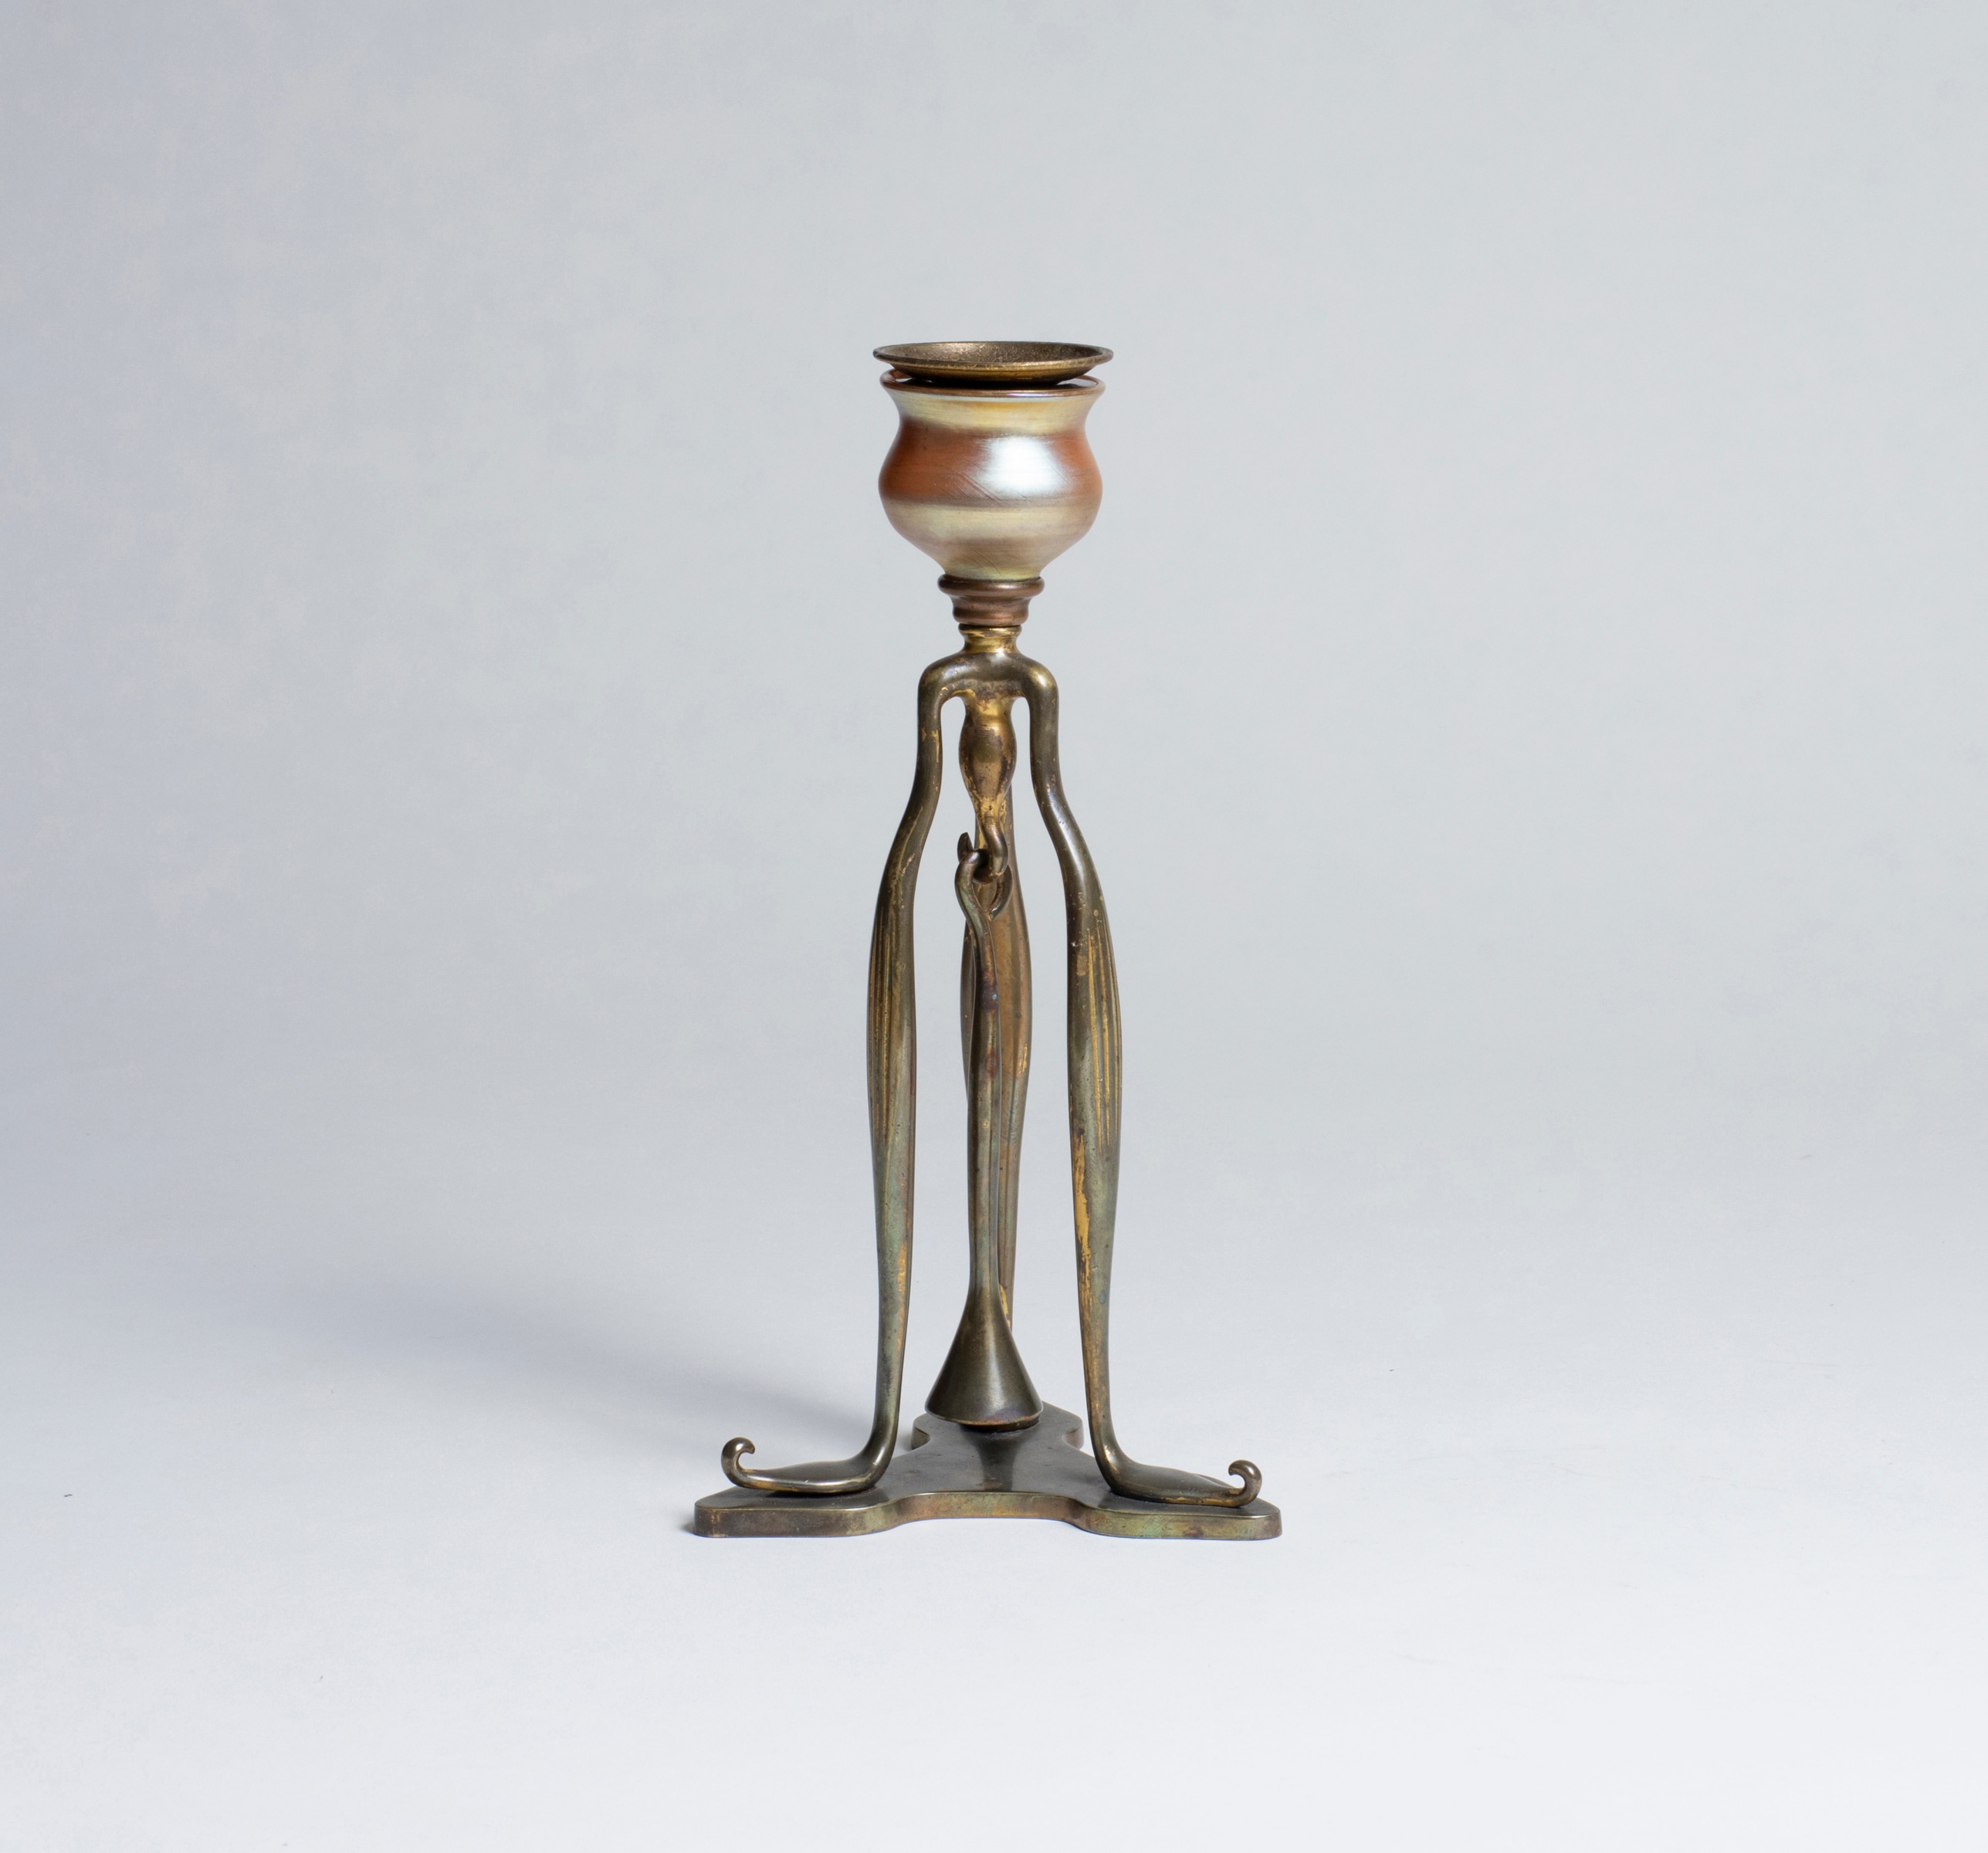 A tiffany studios candlestick, the bronze tripod form with a gold iridescent finial as part of the candle cup.